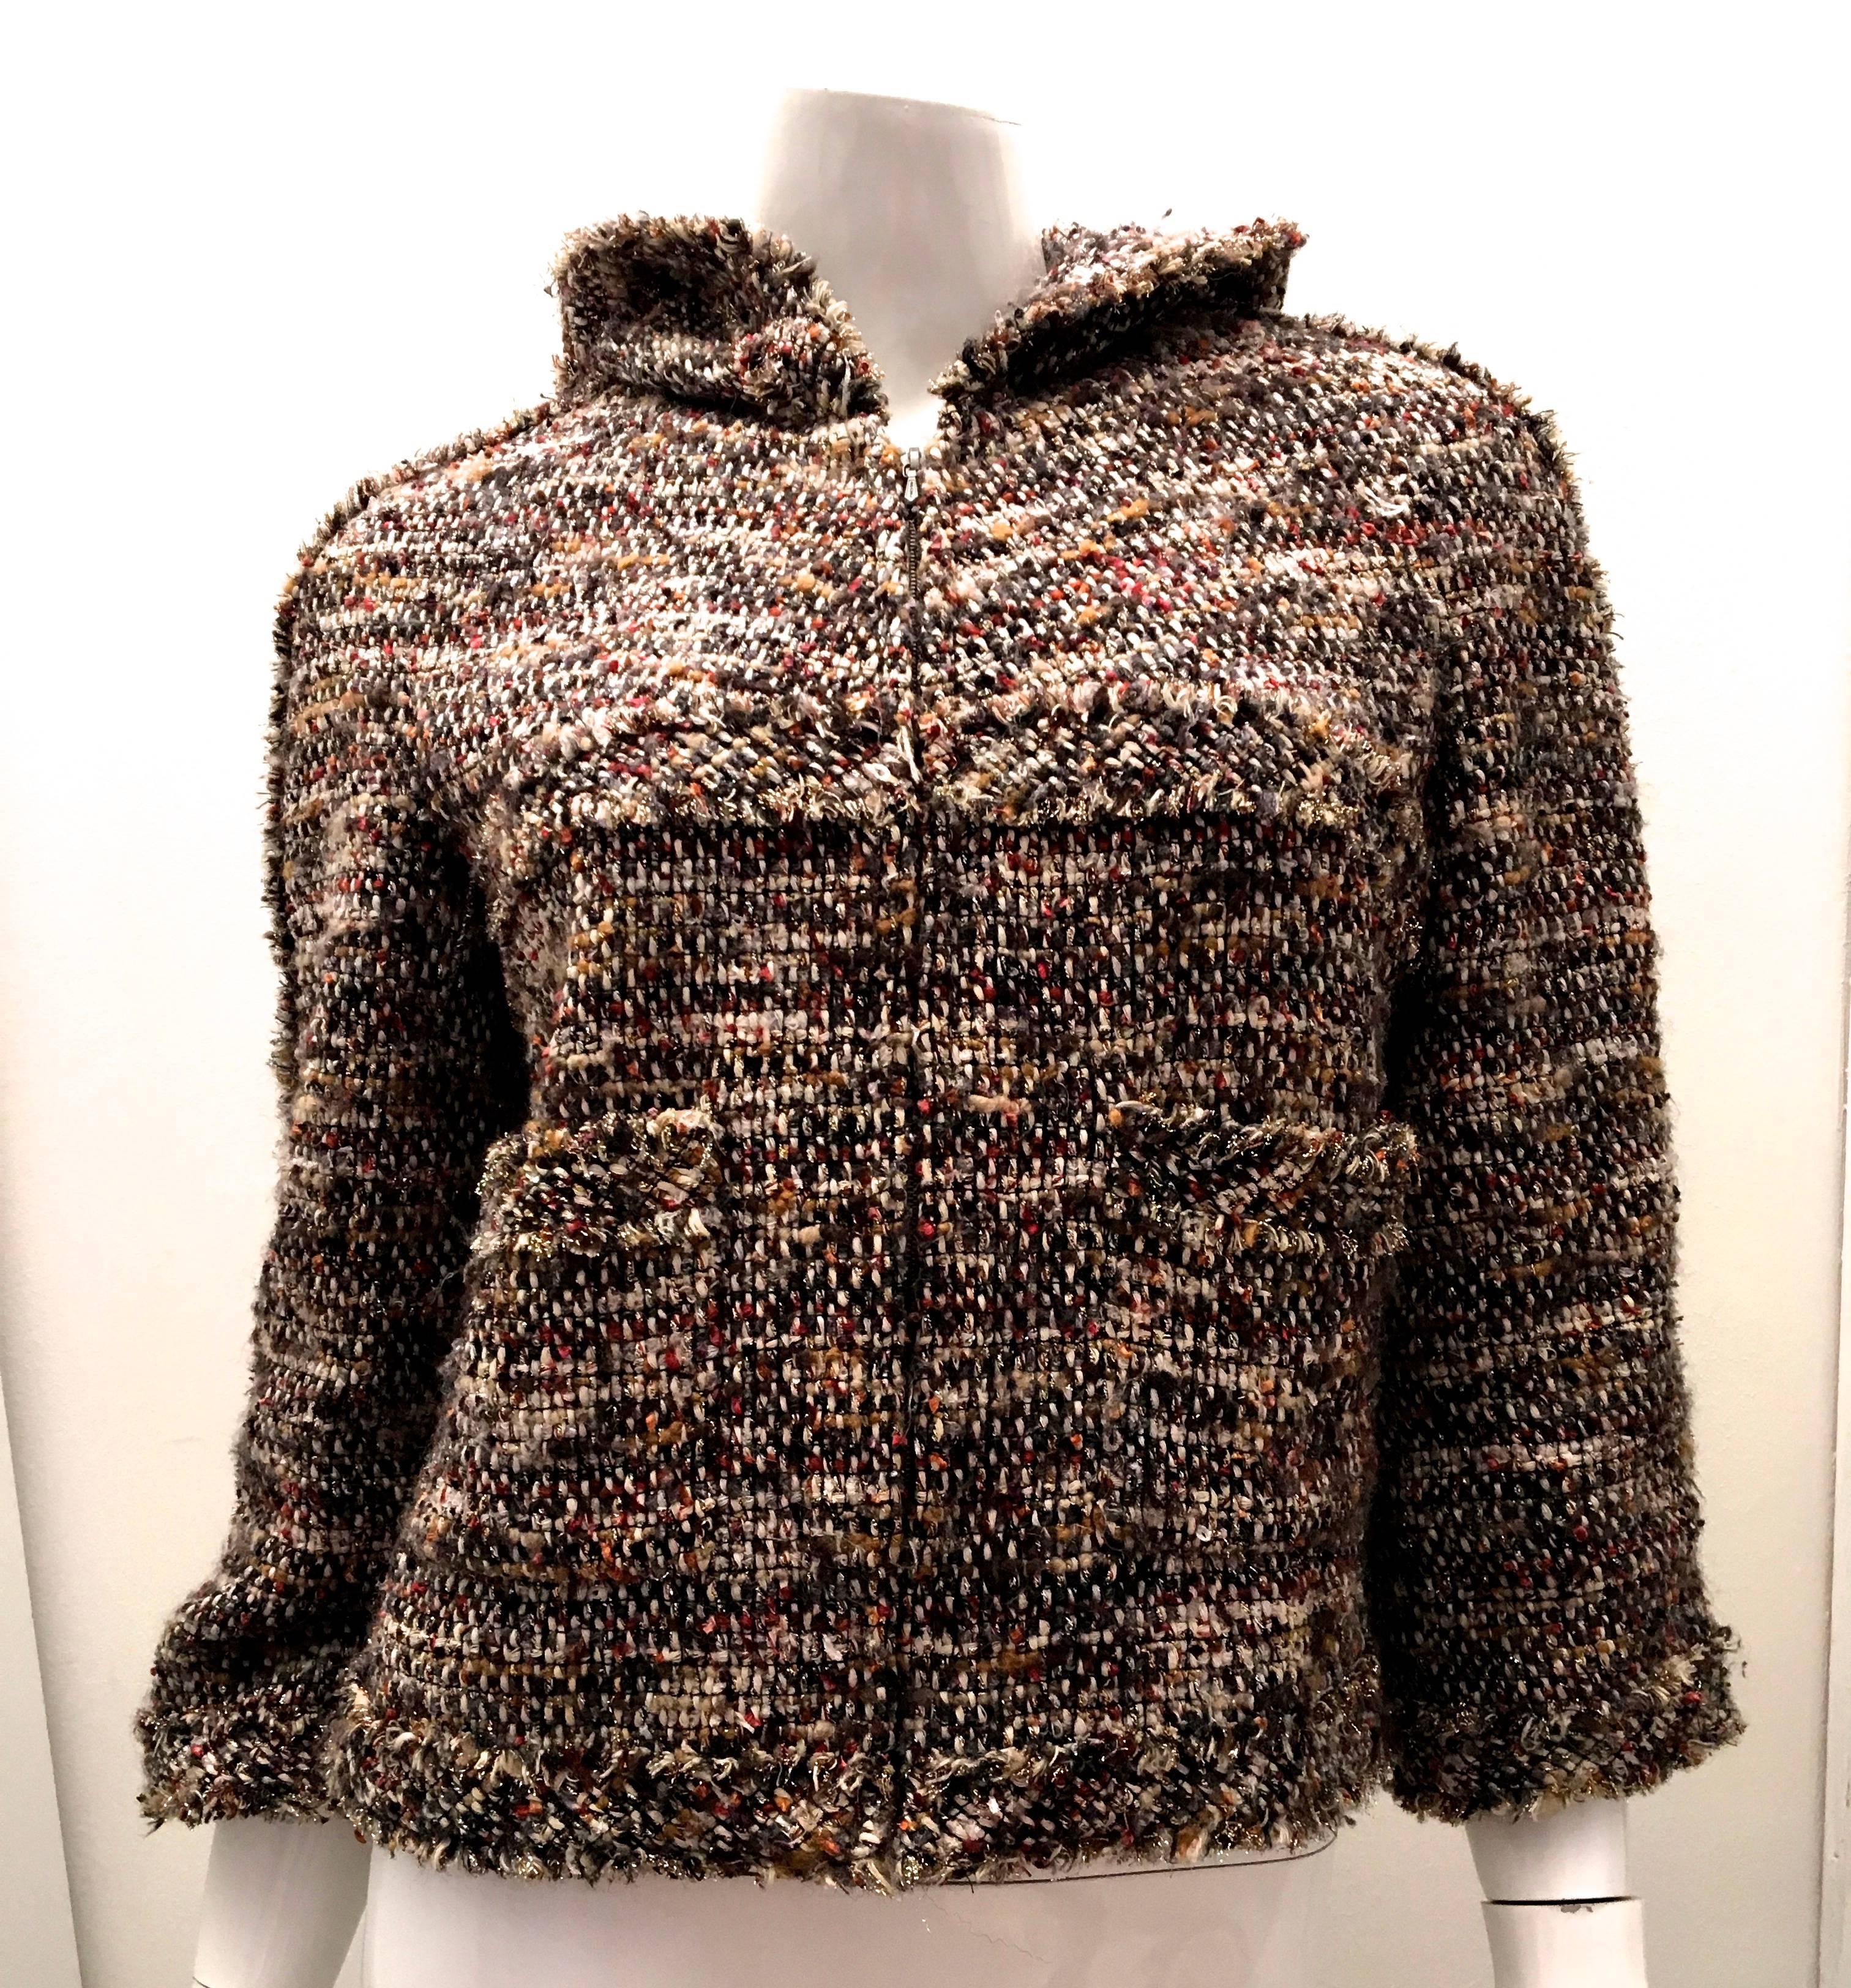 Women's or Men's  Chanel Jacket - Boucle - Fall Colors - Silver Tone Fabric